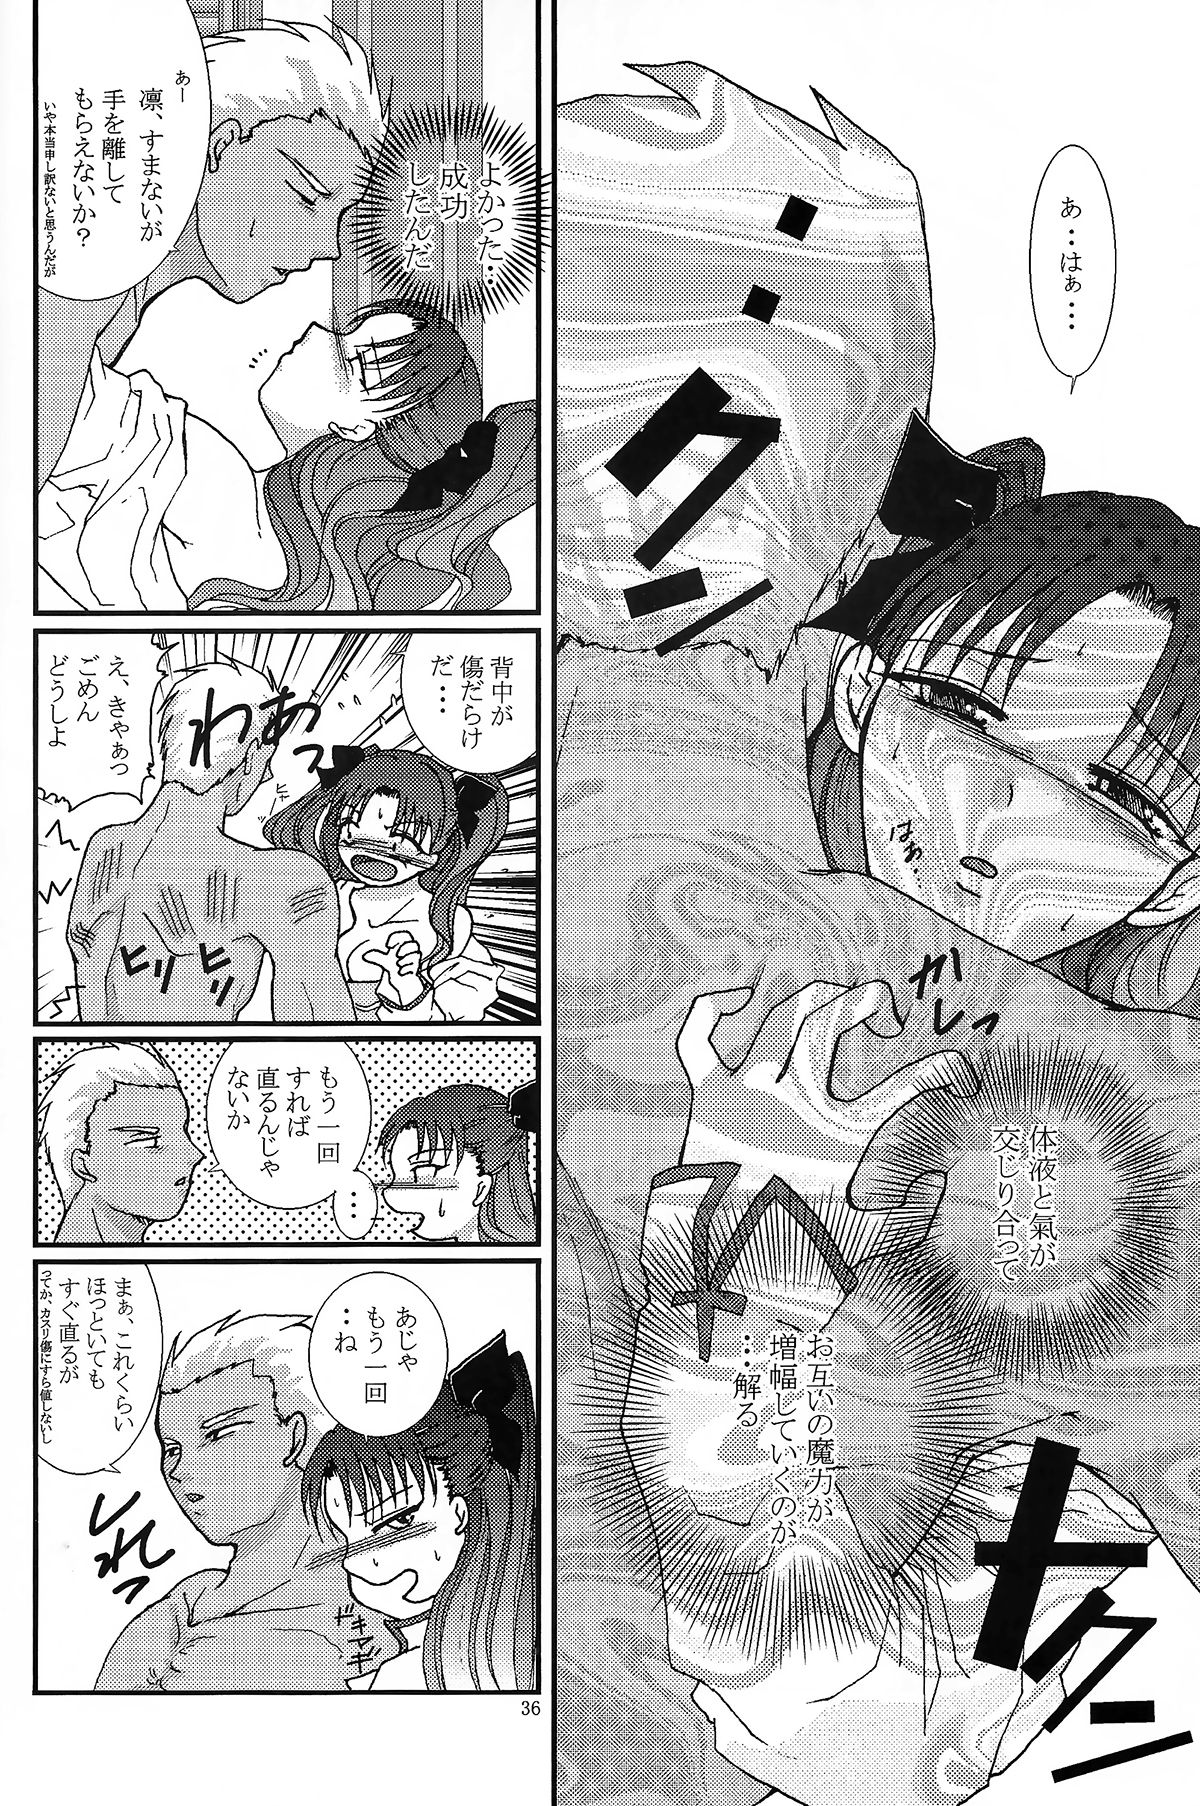 (SC24) [Takeda Syouten (Takeda Sora)] Question-7 (Fate/stay night) page 34 full